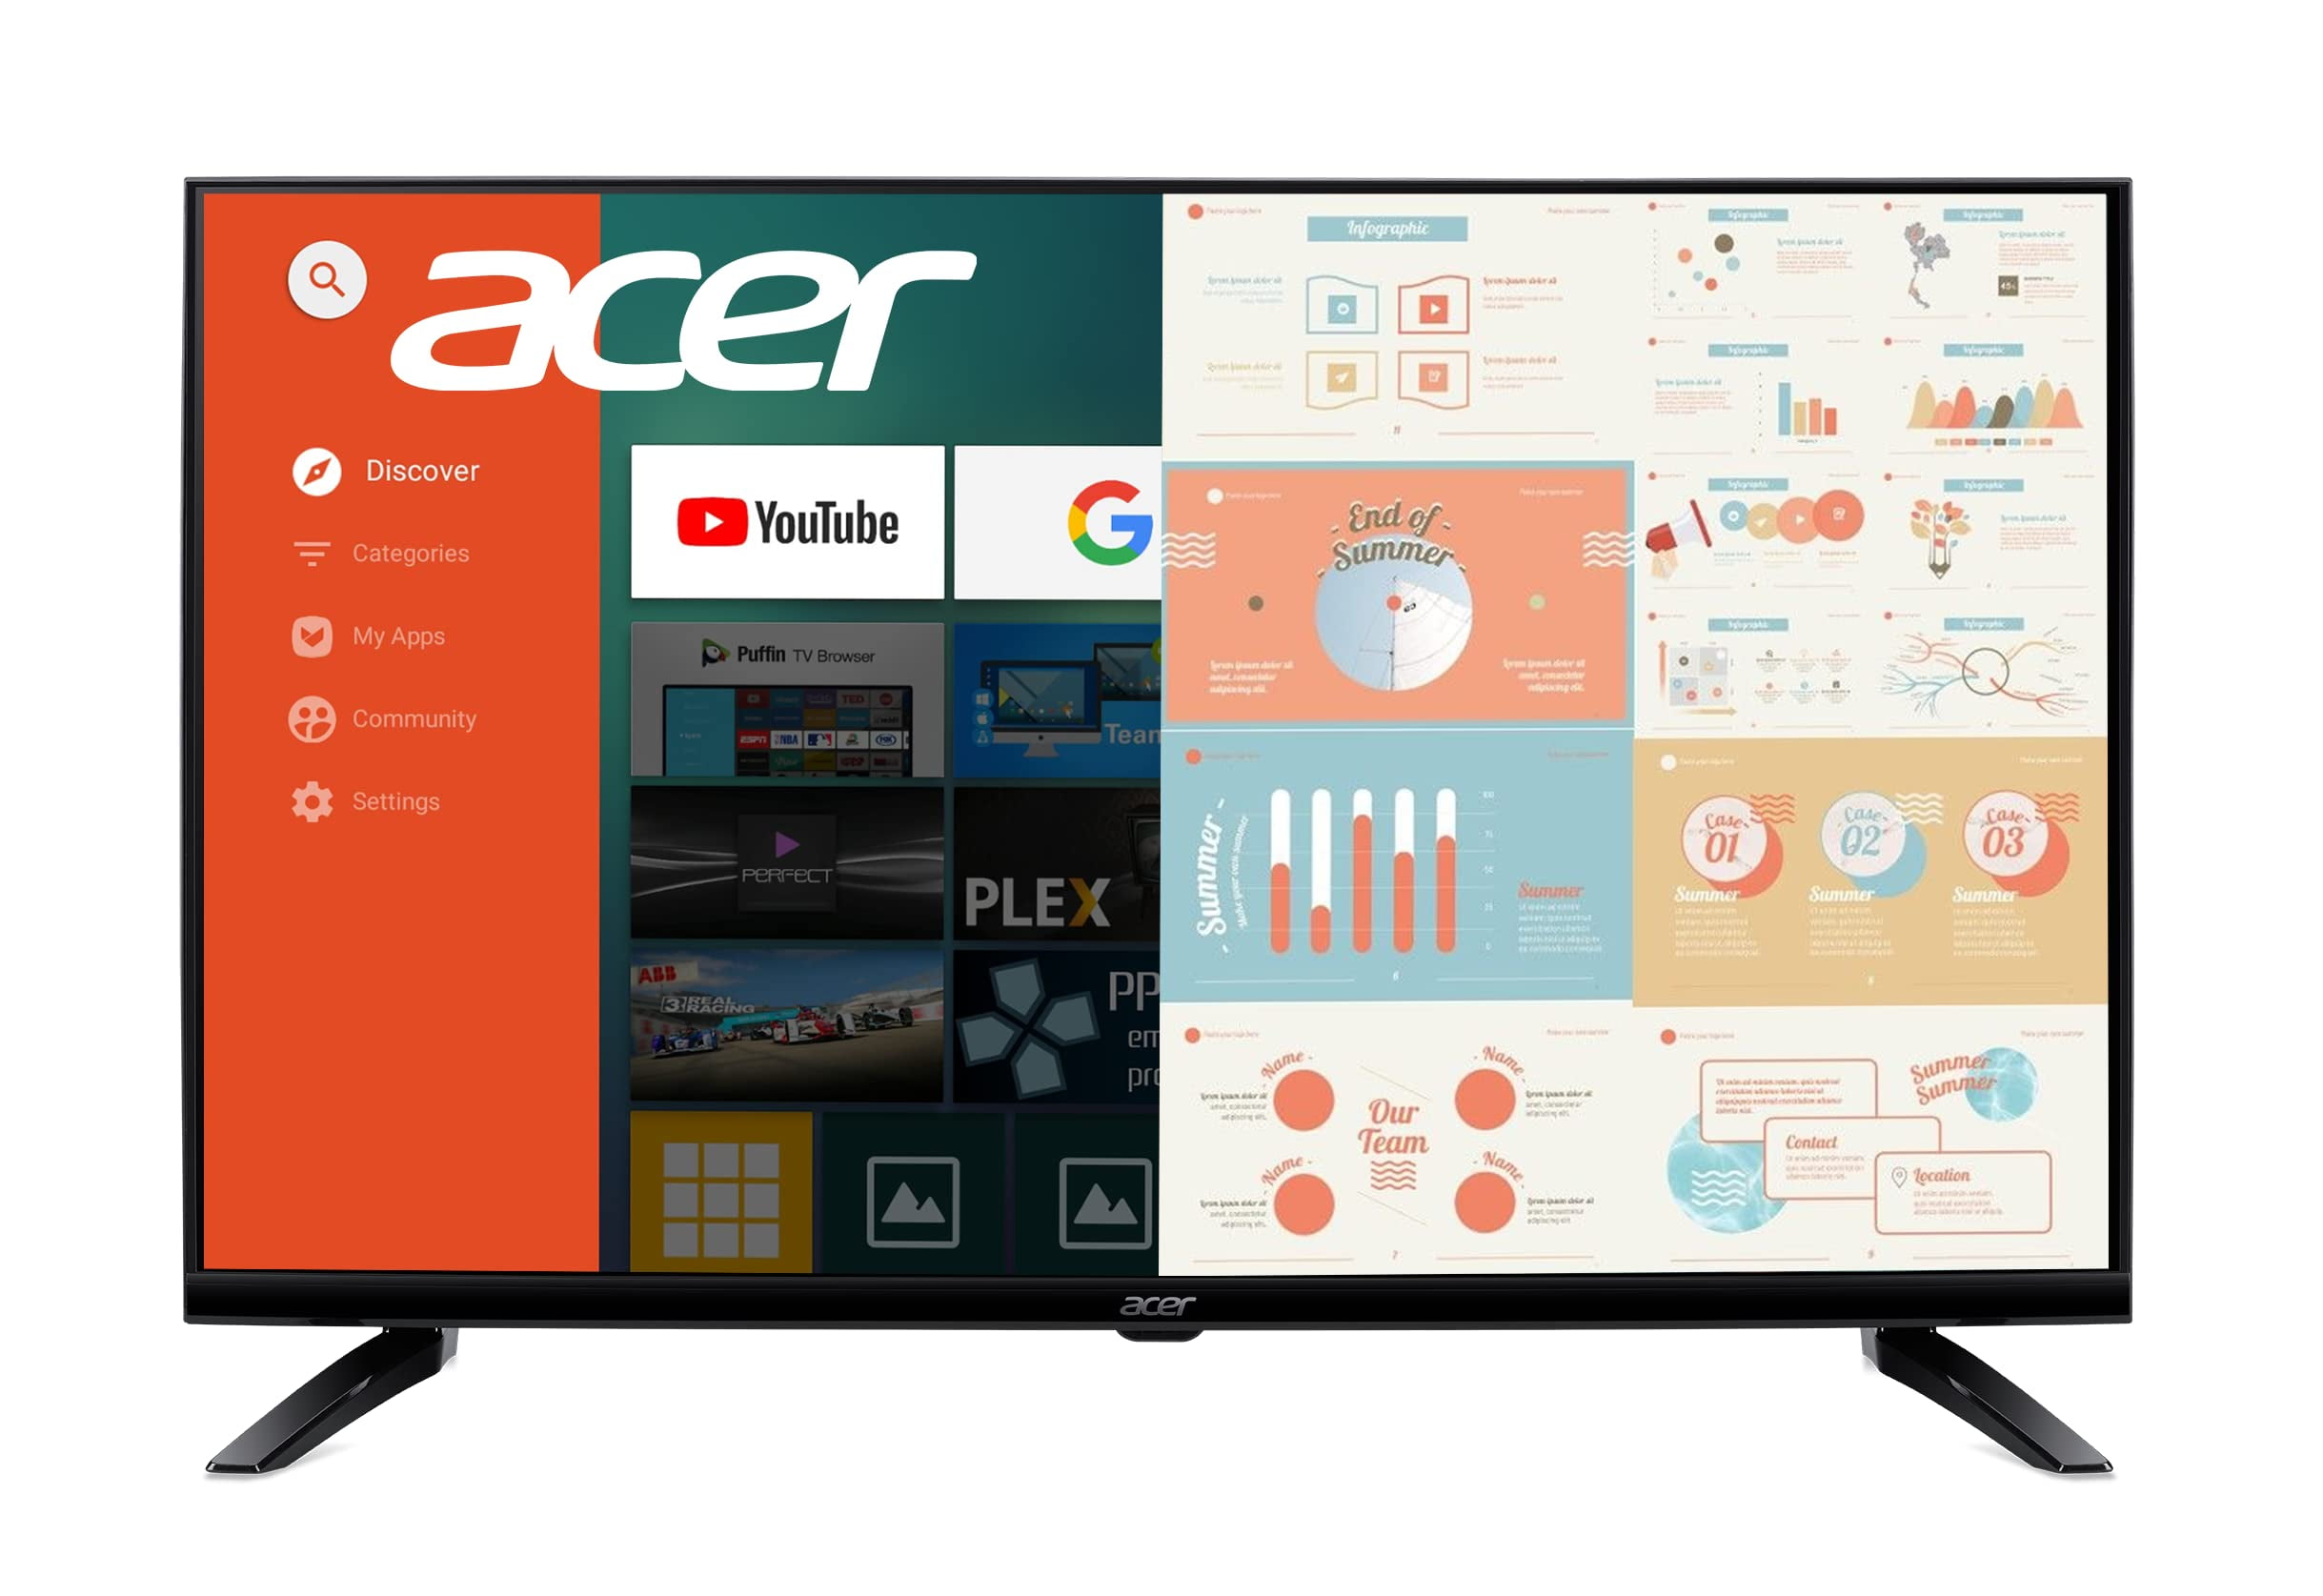 Picture of Acer UM.MD0AA.001 43 in. DA430 Full HD Smart LCD Monitor - 16-9 - 43 in. Class - In-plane Switching IPS Technology - 1920 x 1080 - 1.07 Billion Colors - 200 Nit - 8 ms - 60 Hz Refresh Rate, Black